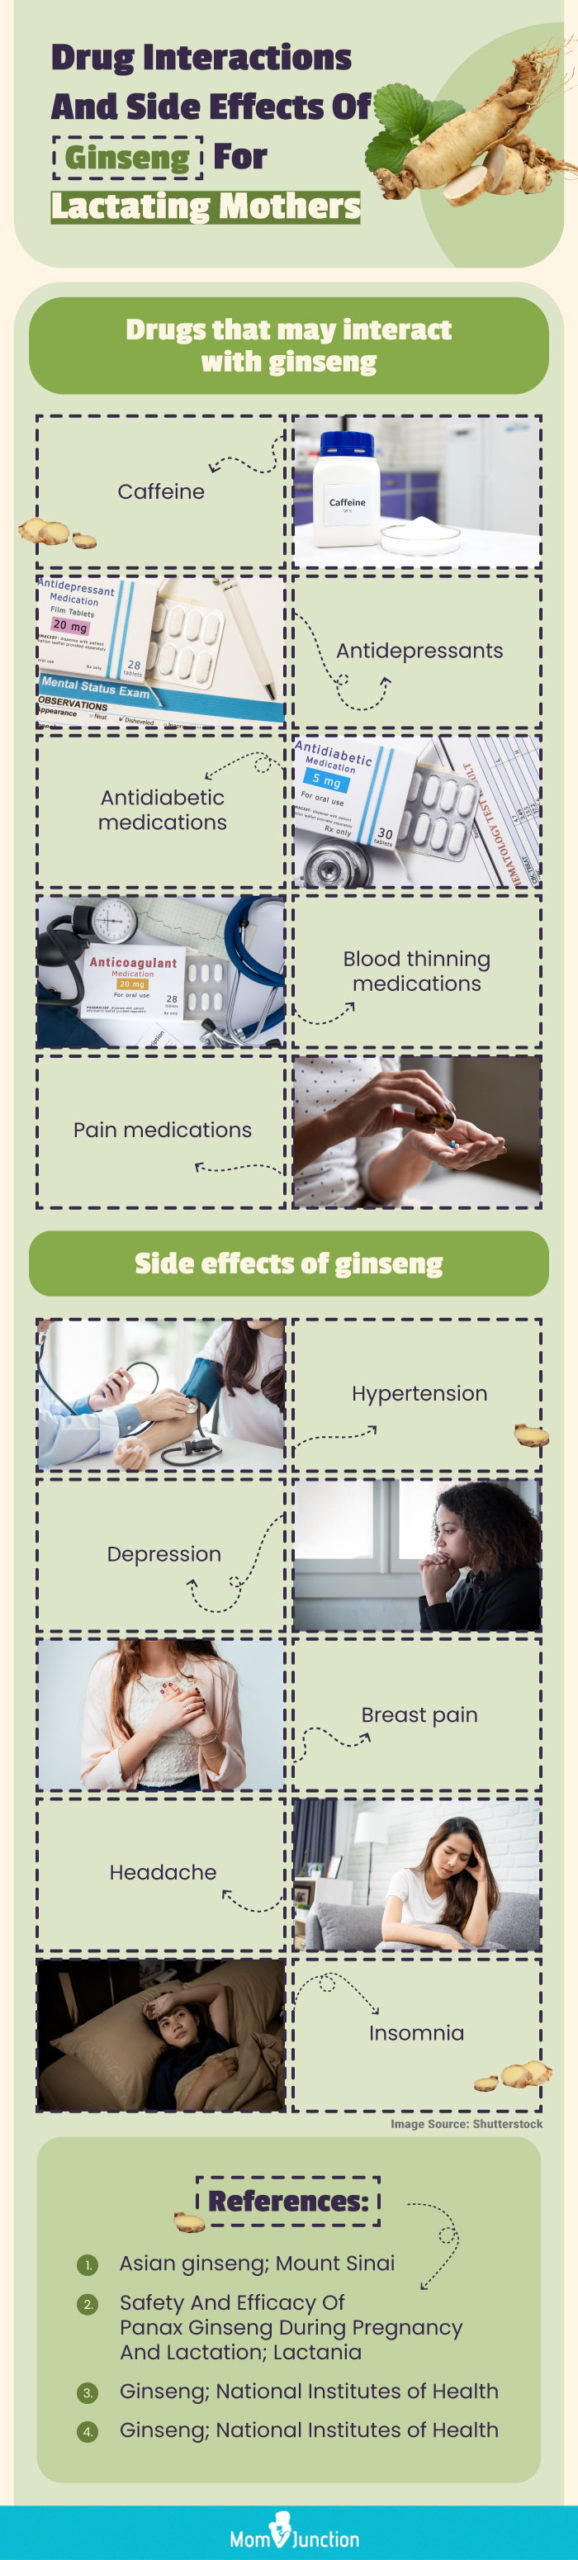 ginseng drug interactions and side effects while breastfeeding (infographic)